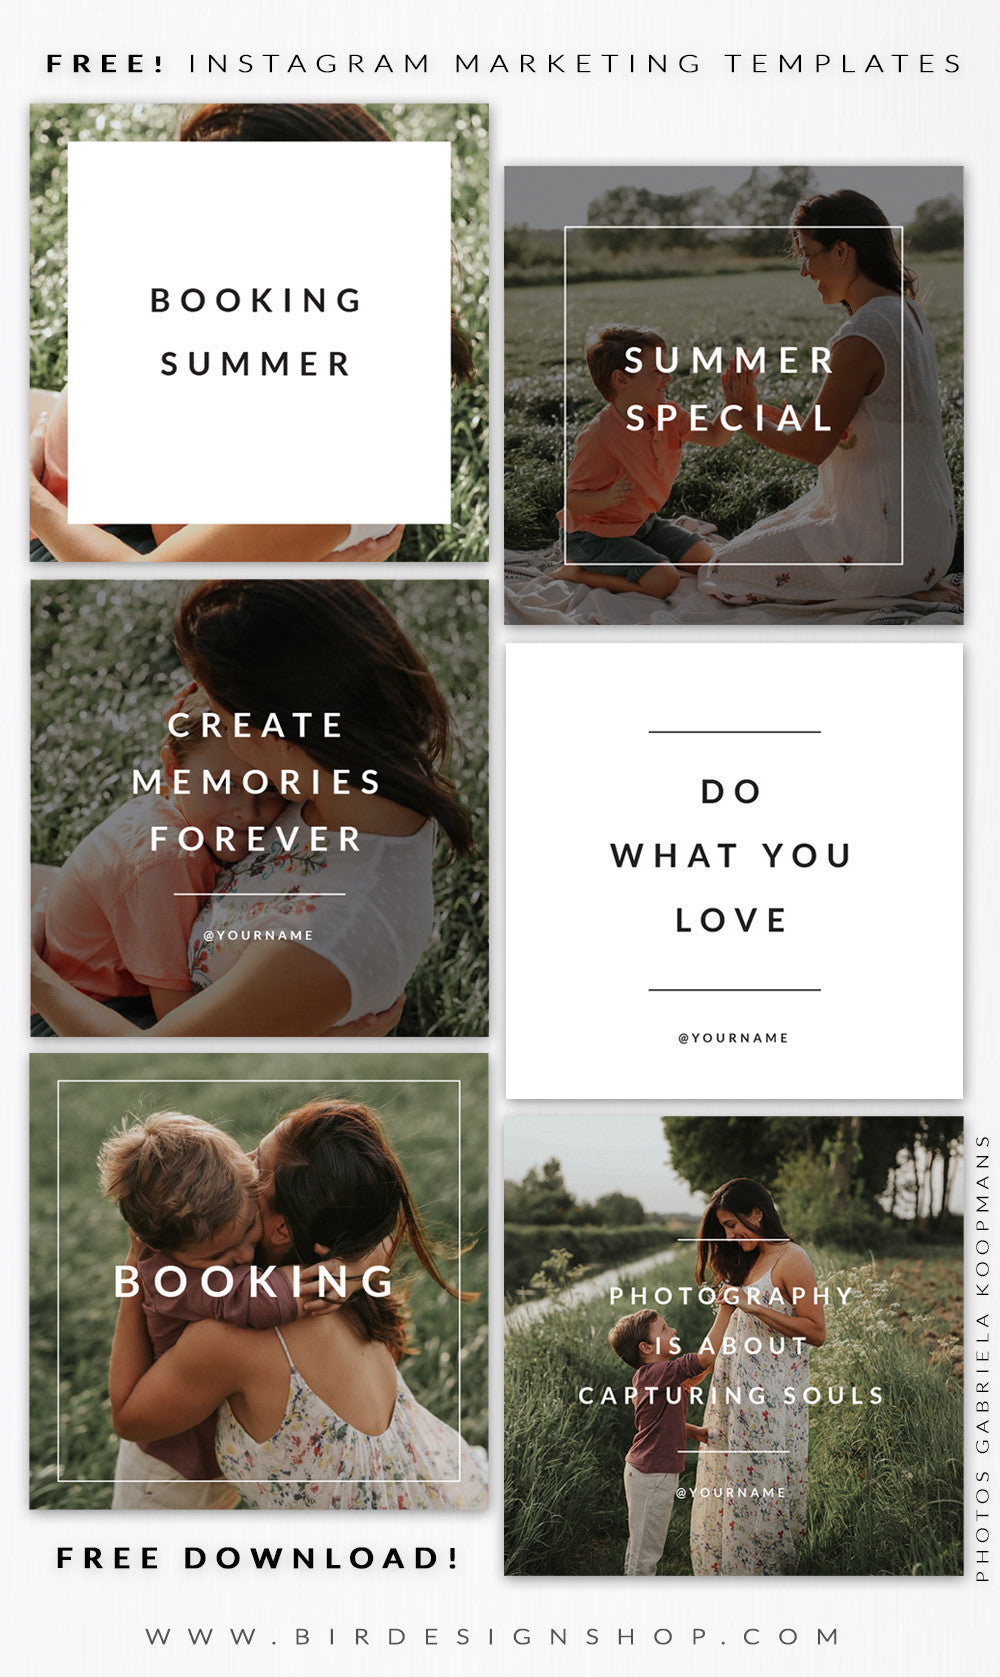 Free download - instagram and social media templates